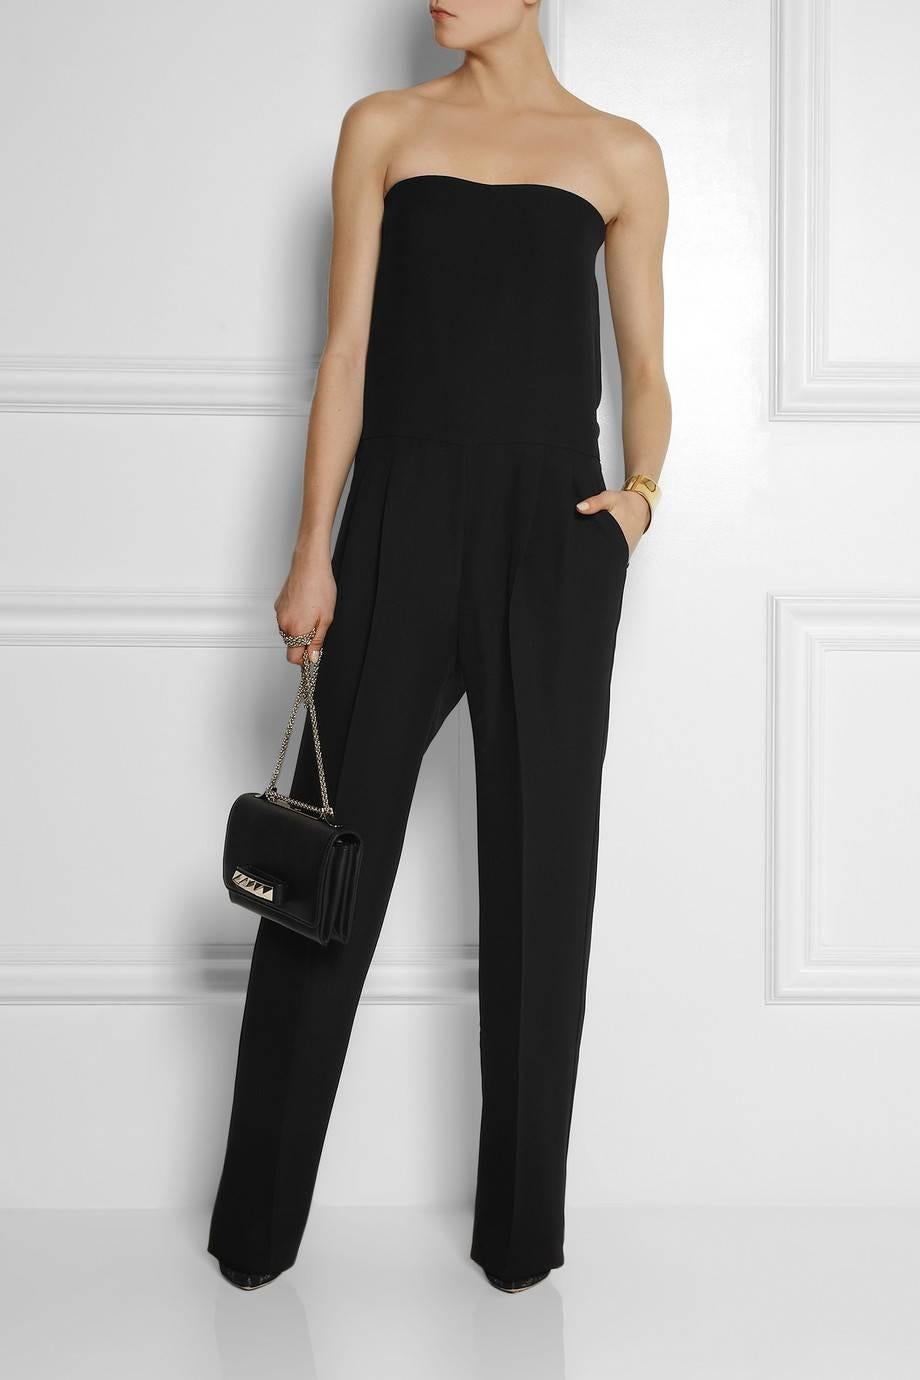 New Gucci Strapless Black Jumpsuit
Gucci's strapless black silk-cady jumpsuit is tailored for a relaxed silhouette but elegant fit. The bodice is structured so that you don't need to worry about finding the perfect bra. 
Black silk-cady.
Internal